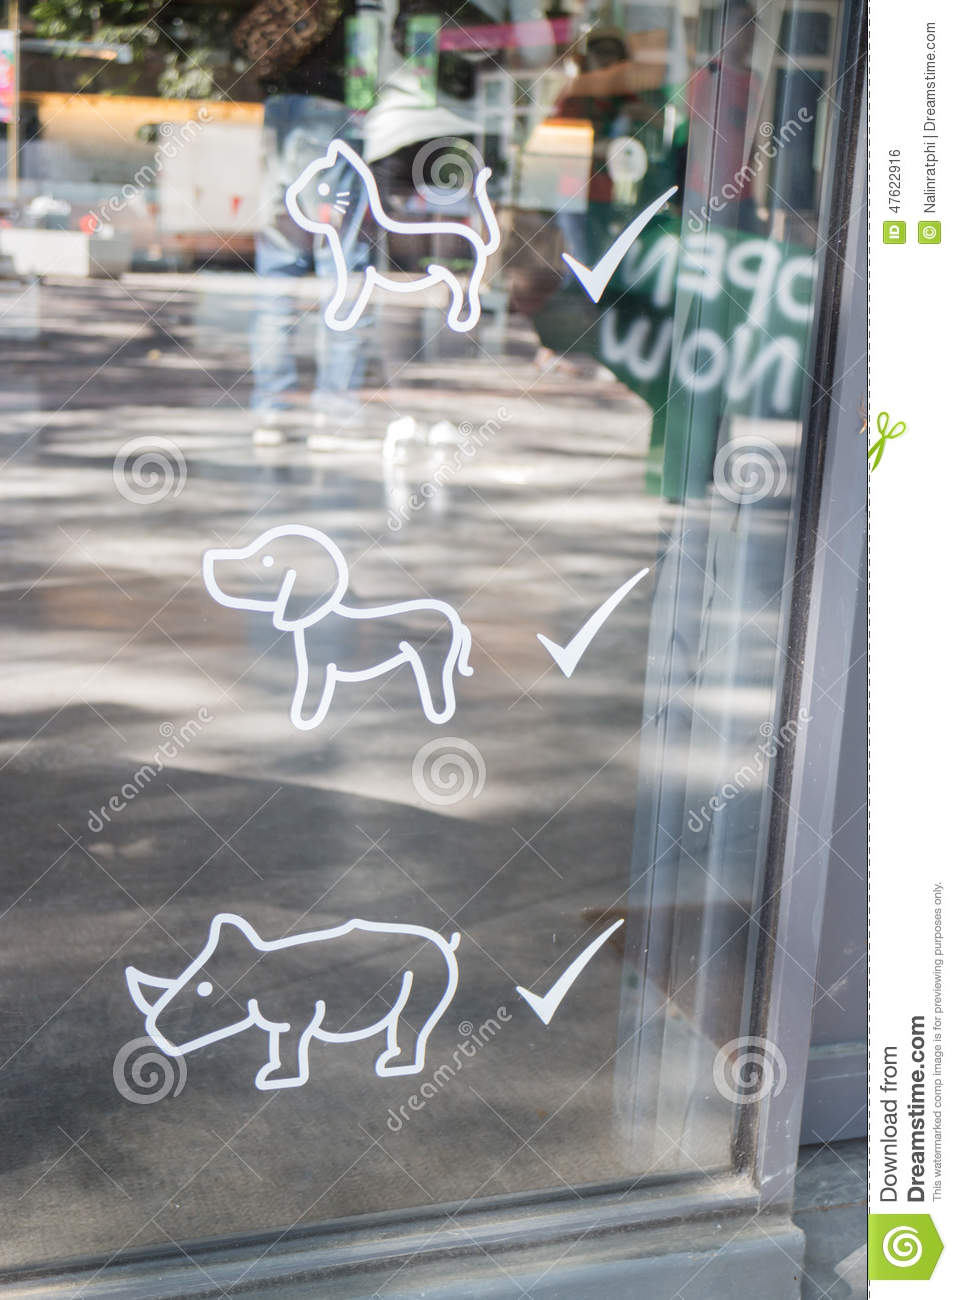 Friendly Pets Allowed Entry Sign Stock Photo Mr No Pr No 1 37 0